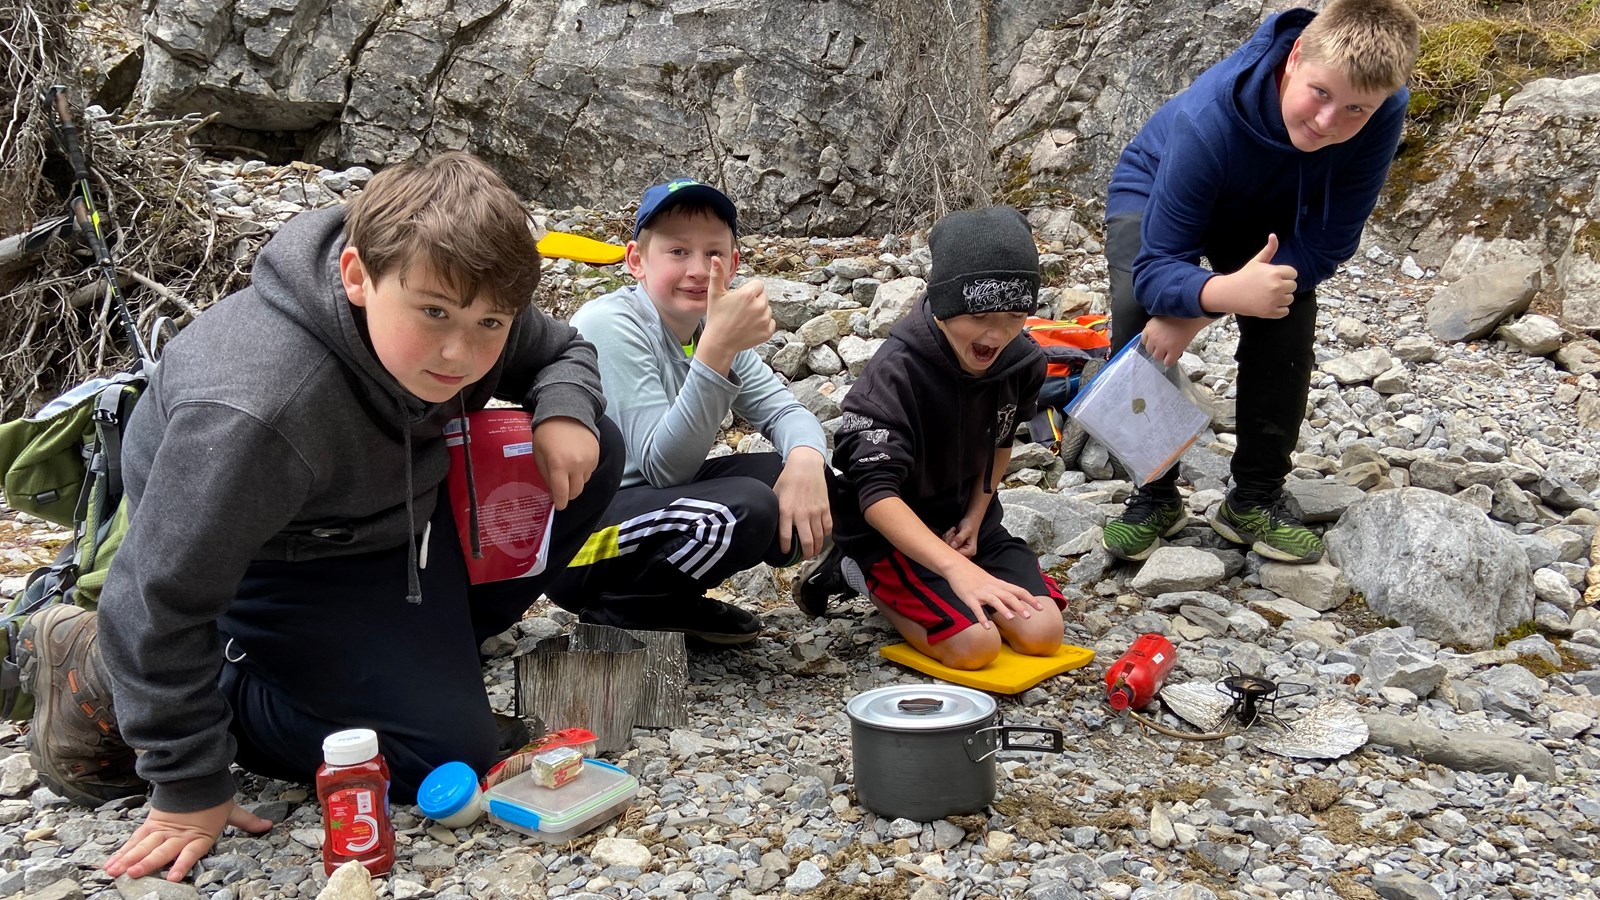 Students cooking outdoors